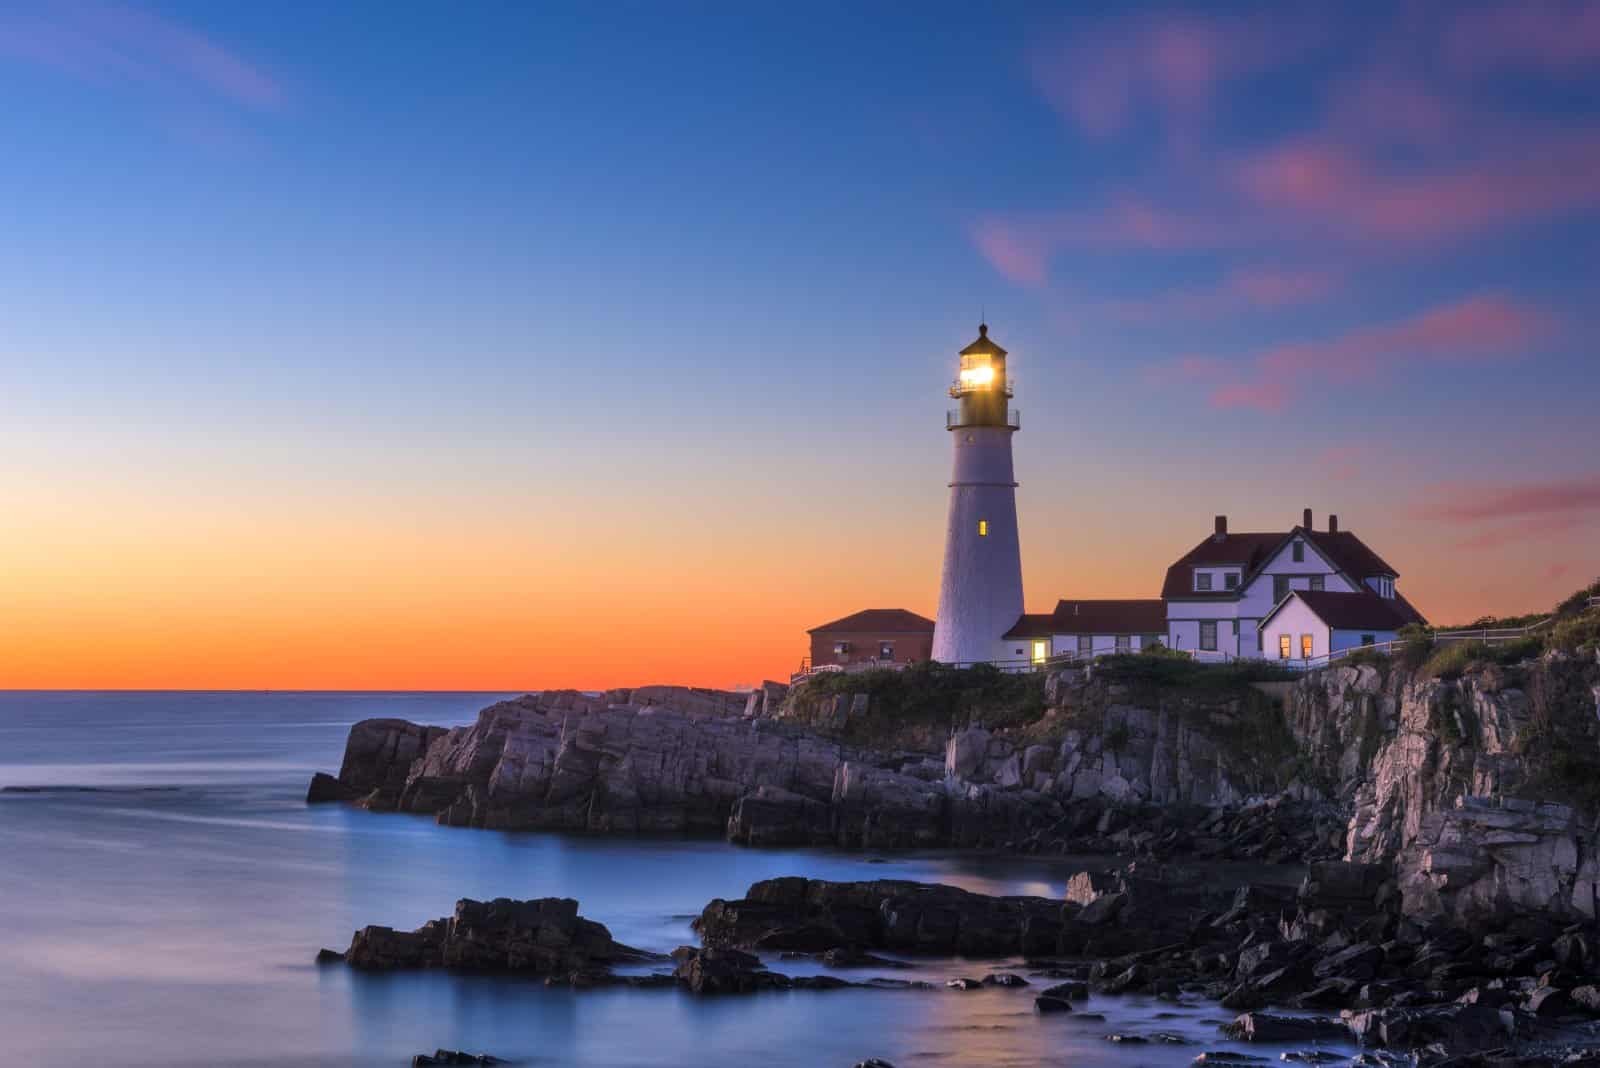 <p class="wp-caption-text">Image Credit: Shutterstock / Sean Pavone</p>  <p><span>Its far-northeast location might seem remote, but Maine’s rugged coastlines, lighthouses, and seafood cuisine offer a quintessential New England experience.</span></p>